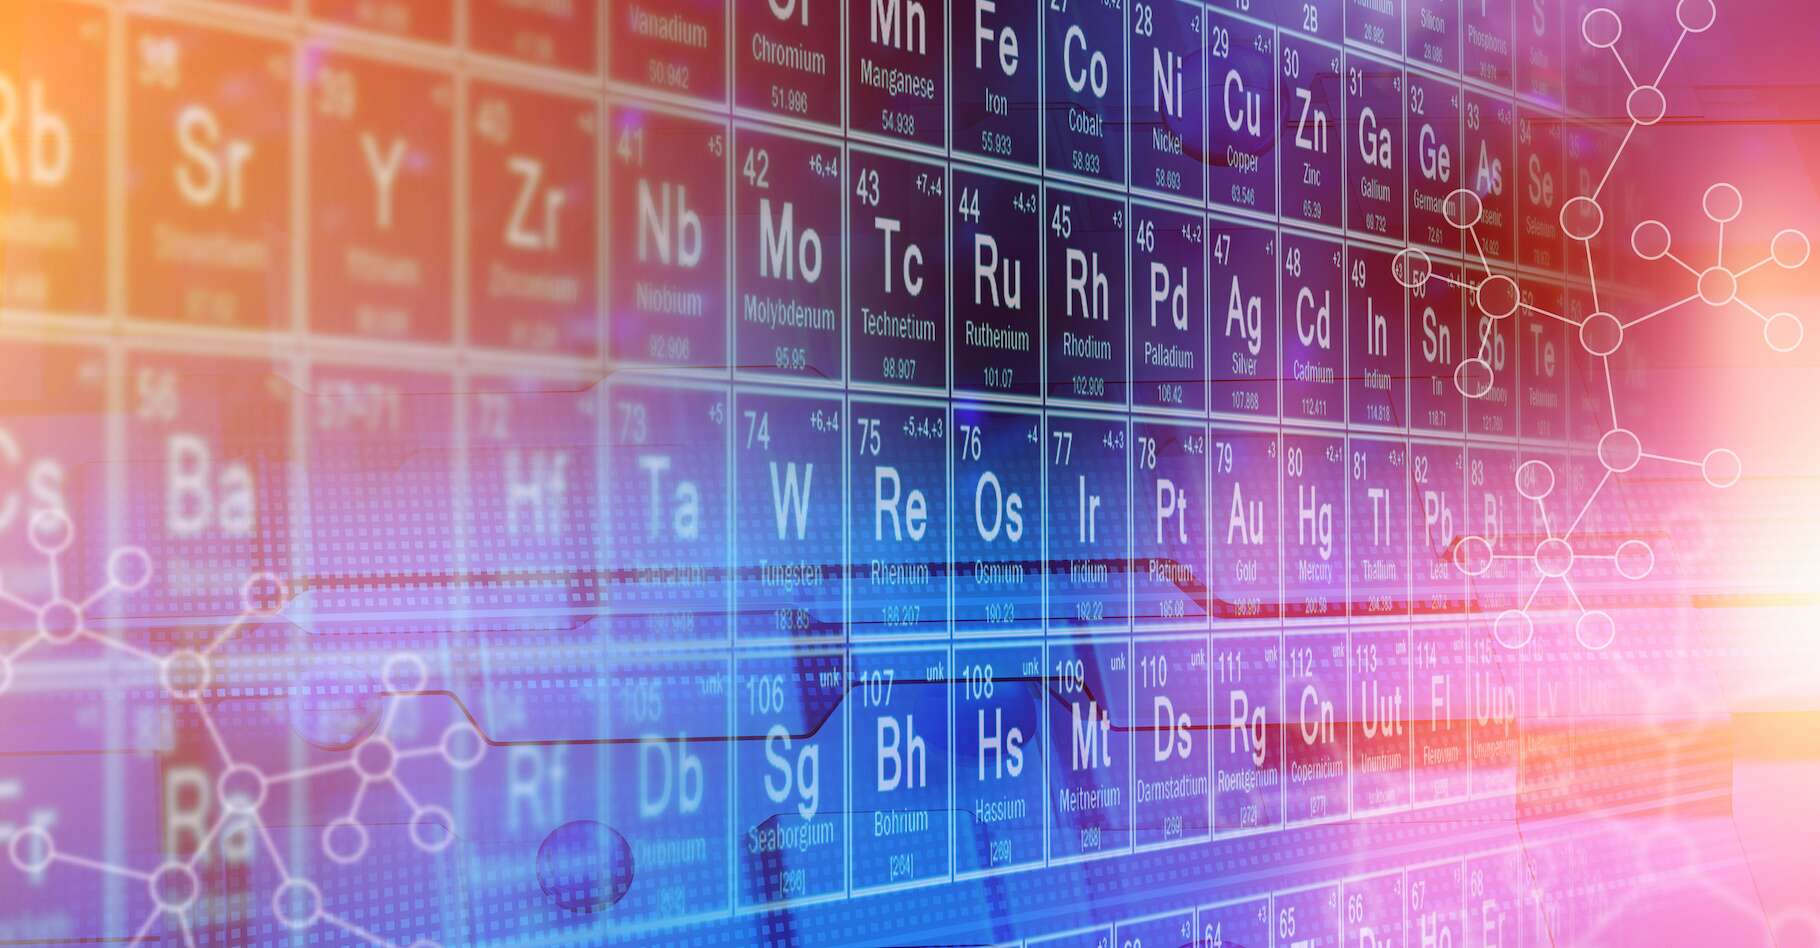 Listen to the sounds of the elements of the periodic table!